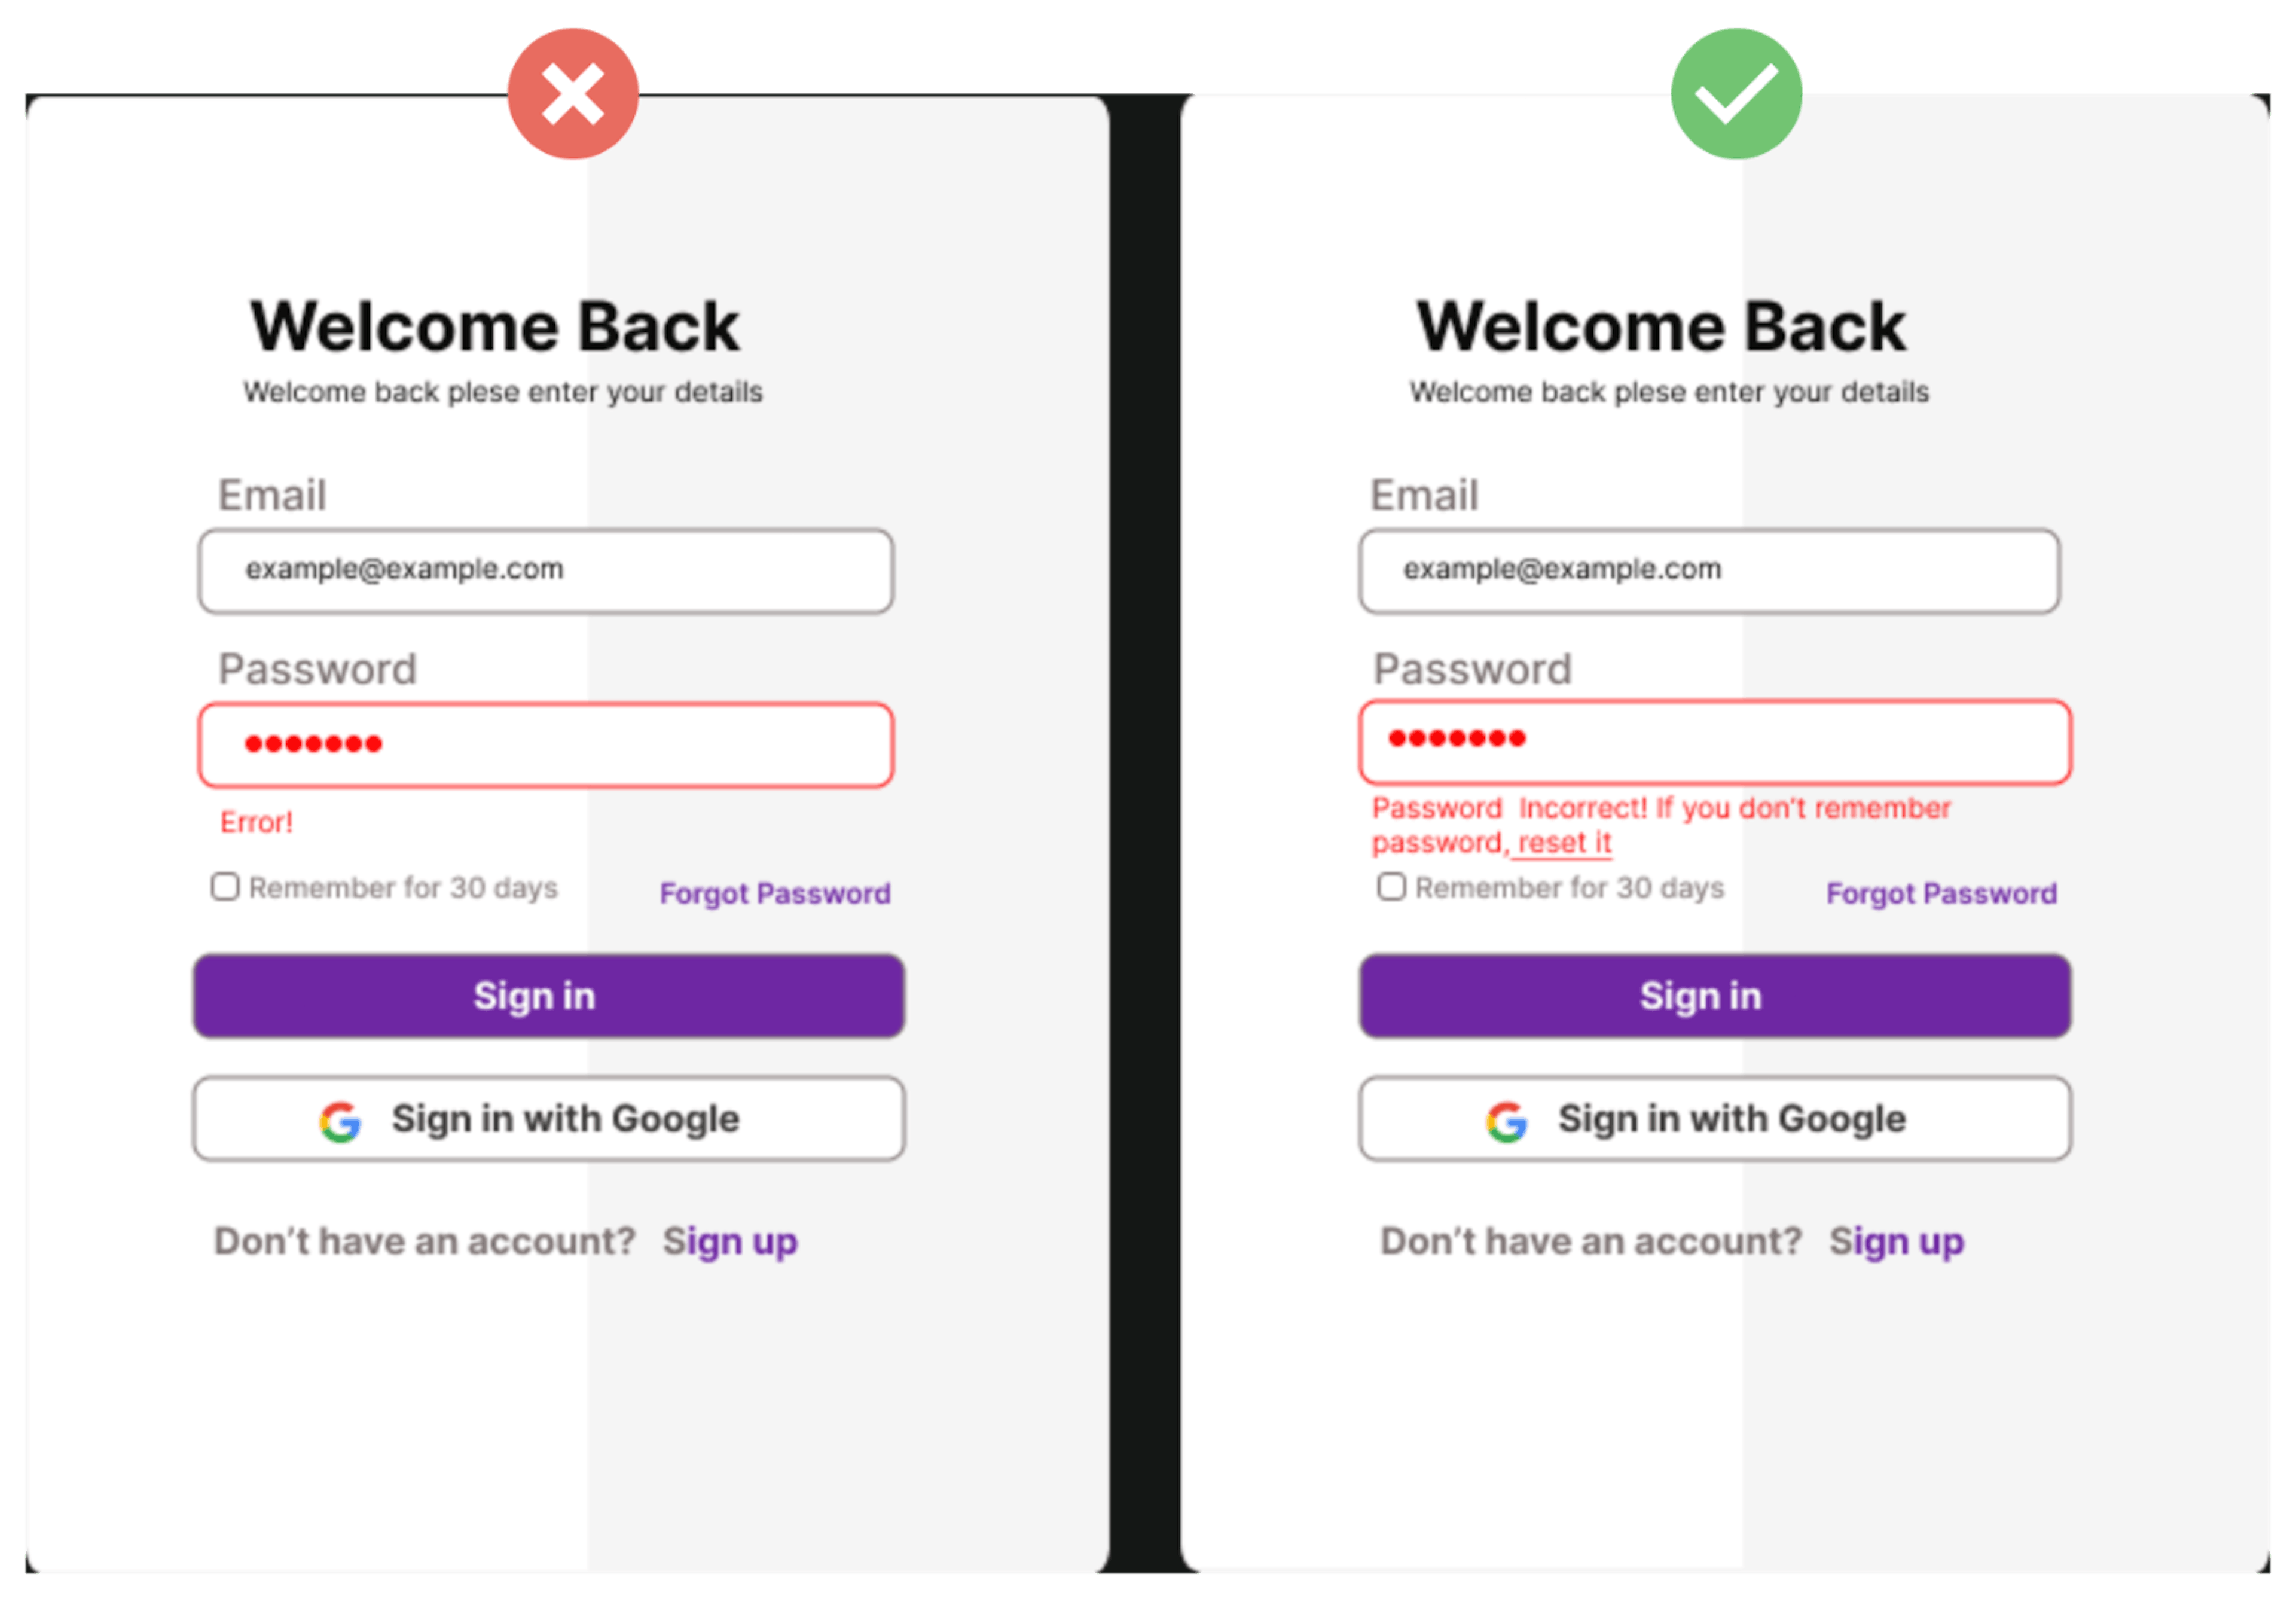  The left image just exhibits an "Error" message without giving a clear clue to the user. The image is designed by using a free Figma template from Bernard Appiedu